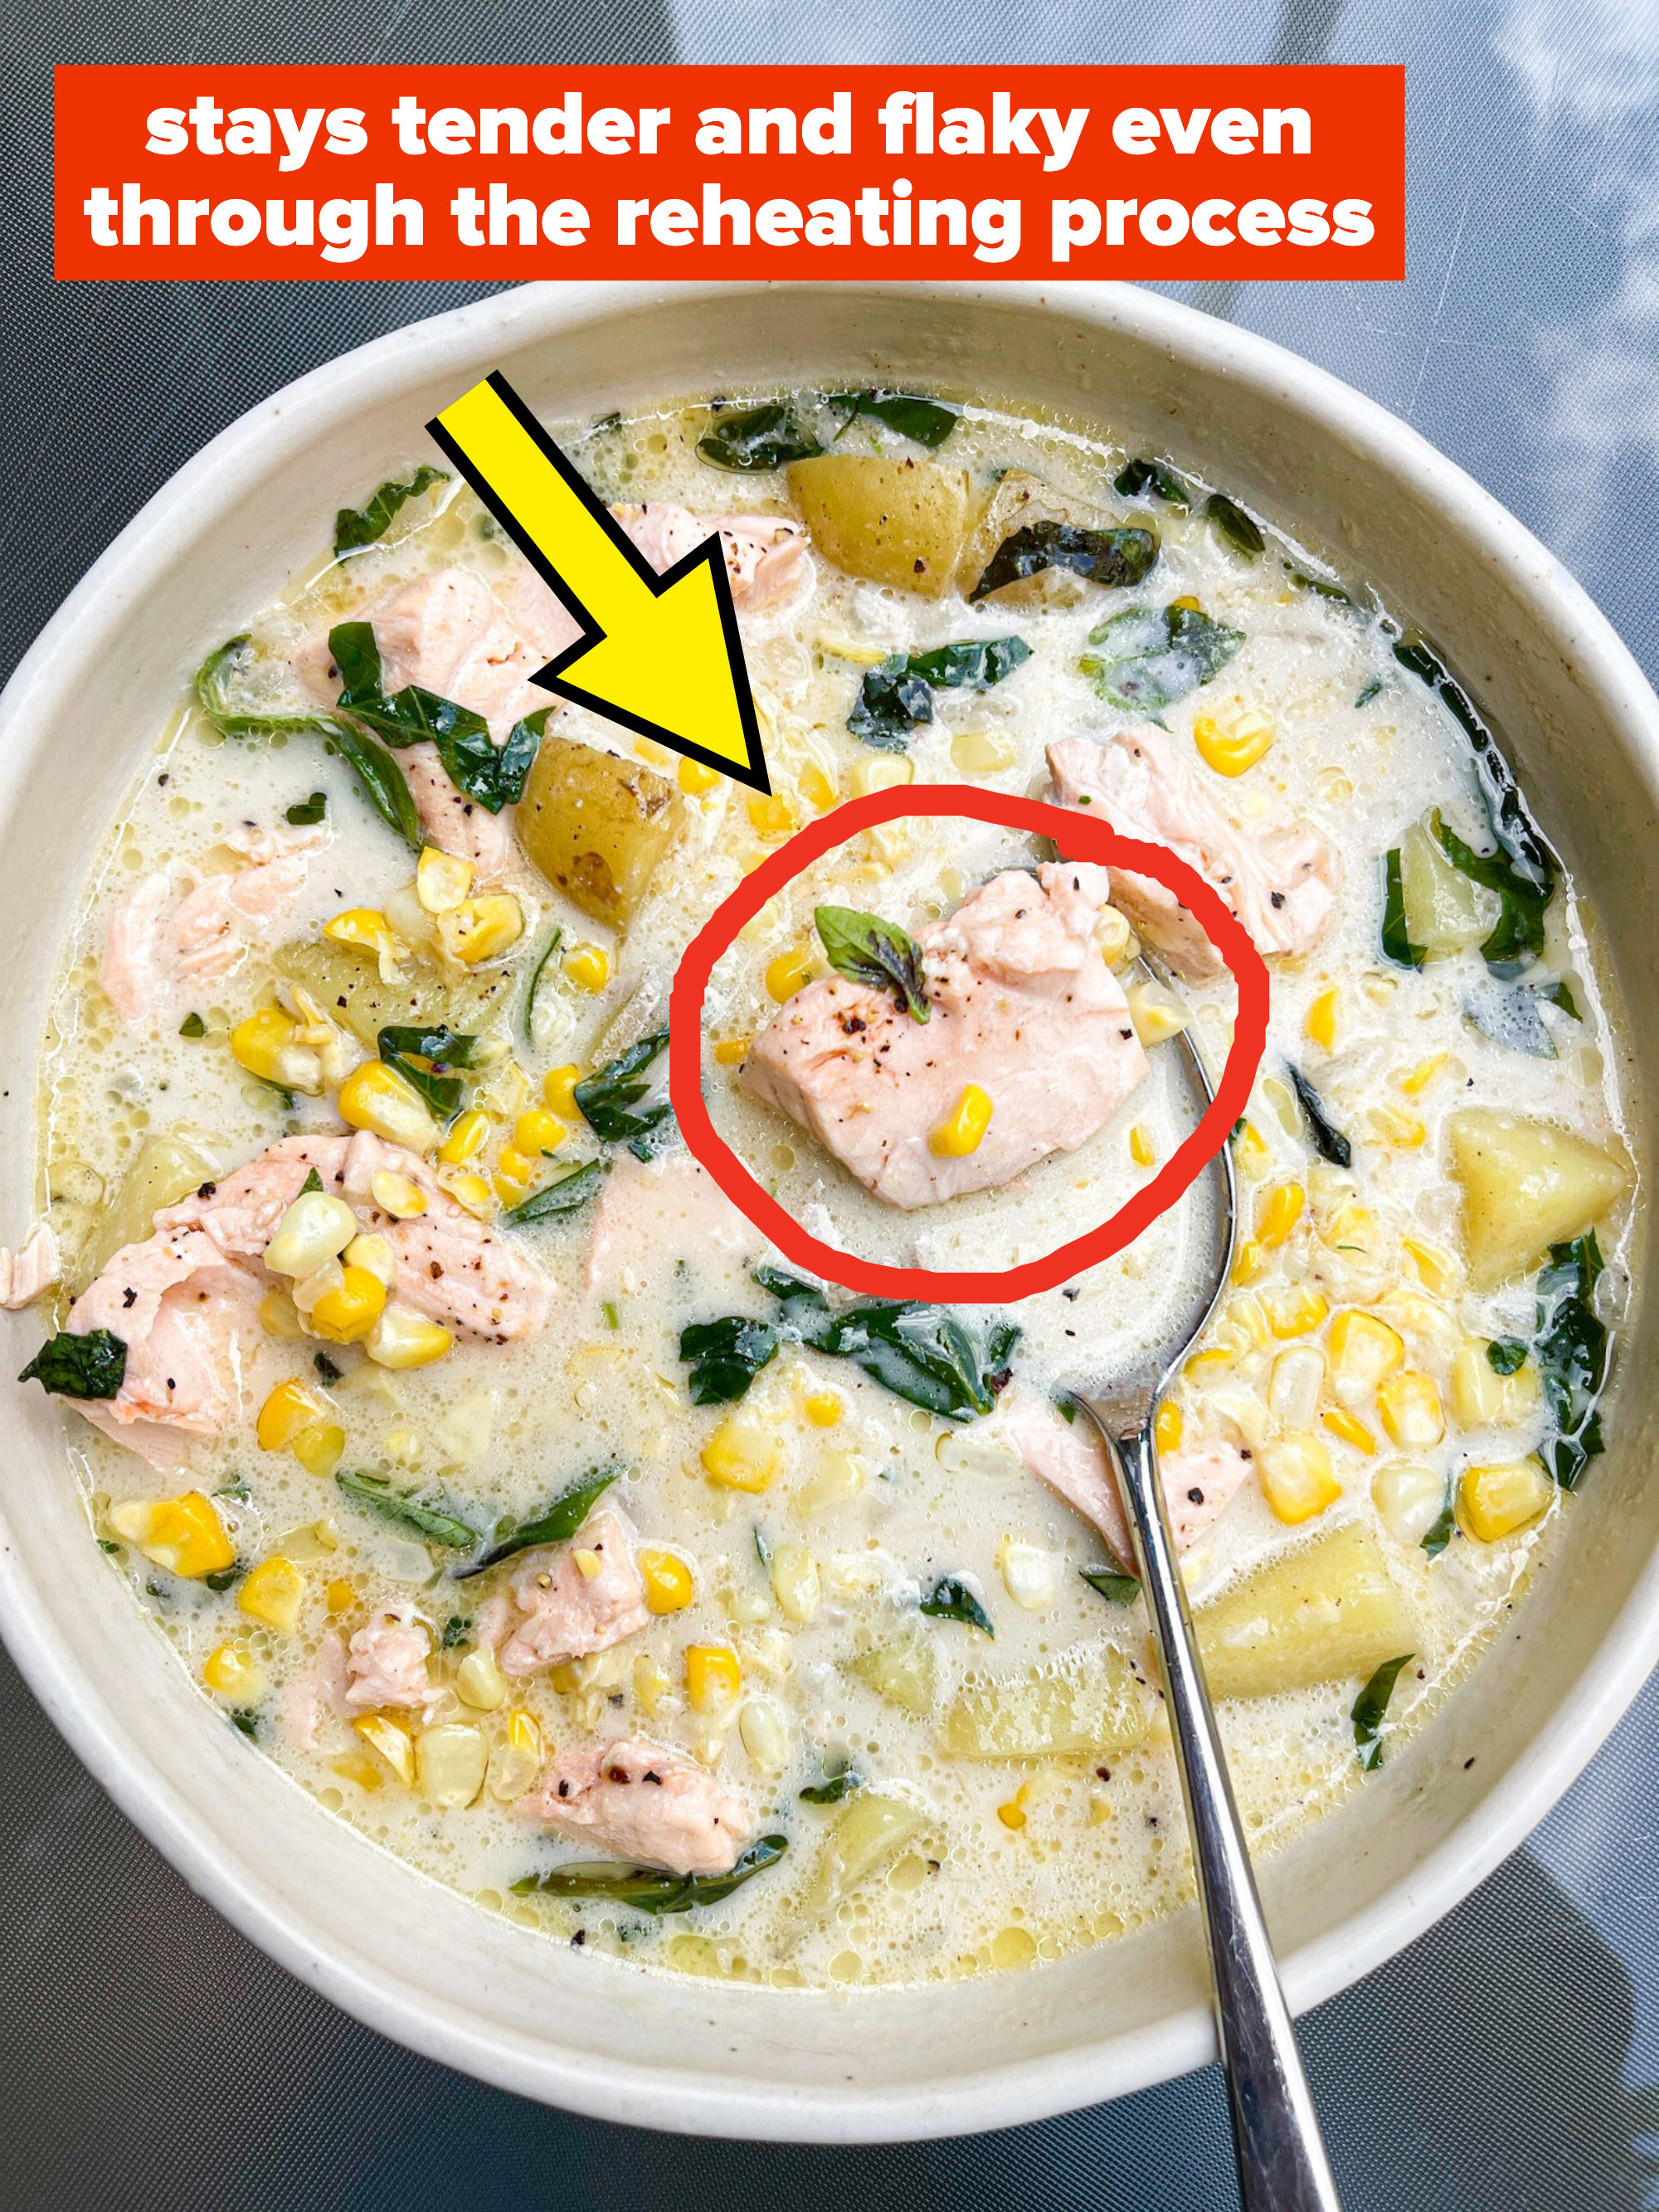 Chowder in a bowl with corn, greens, and flaky salmon that stays tender even through the reheating process